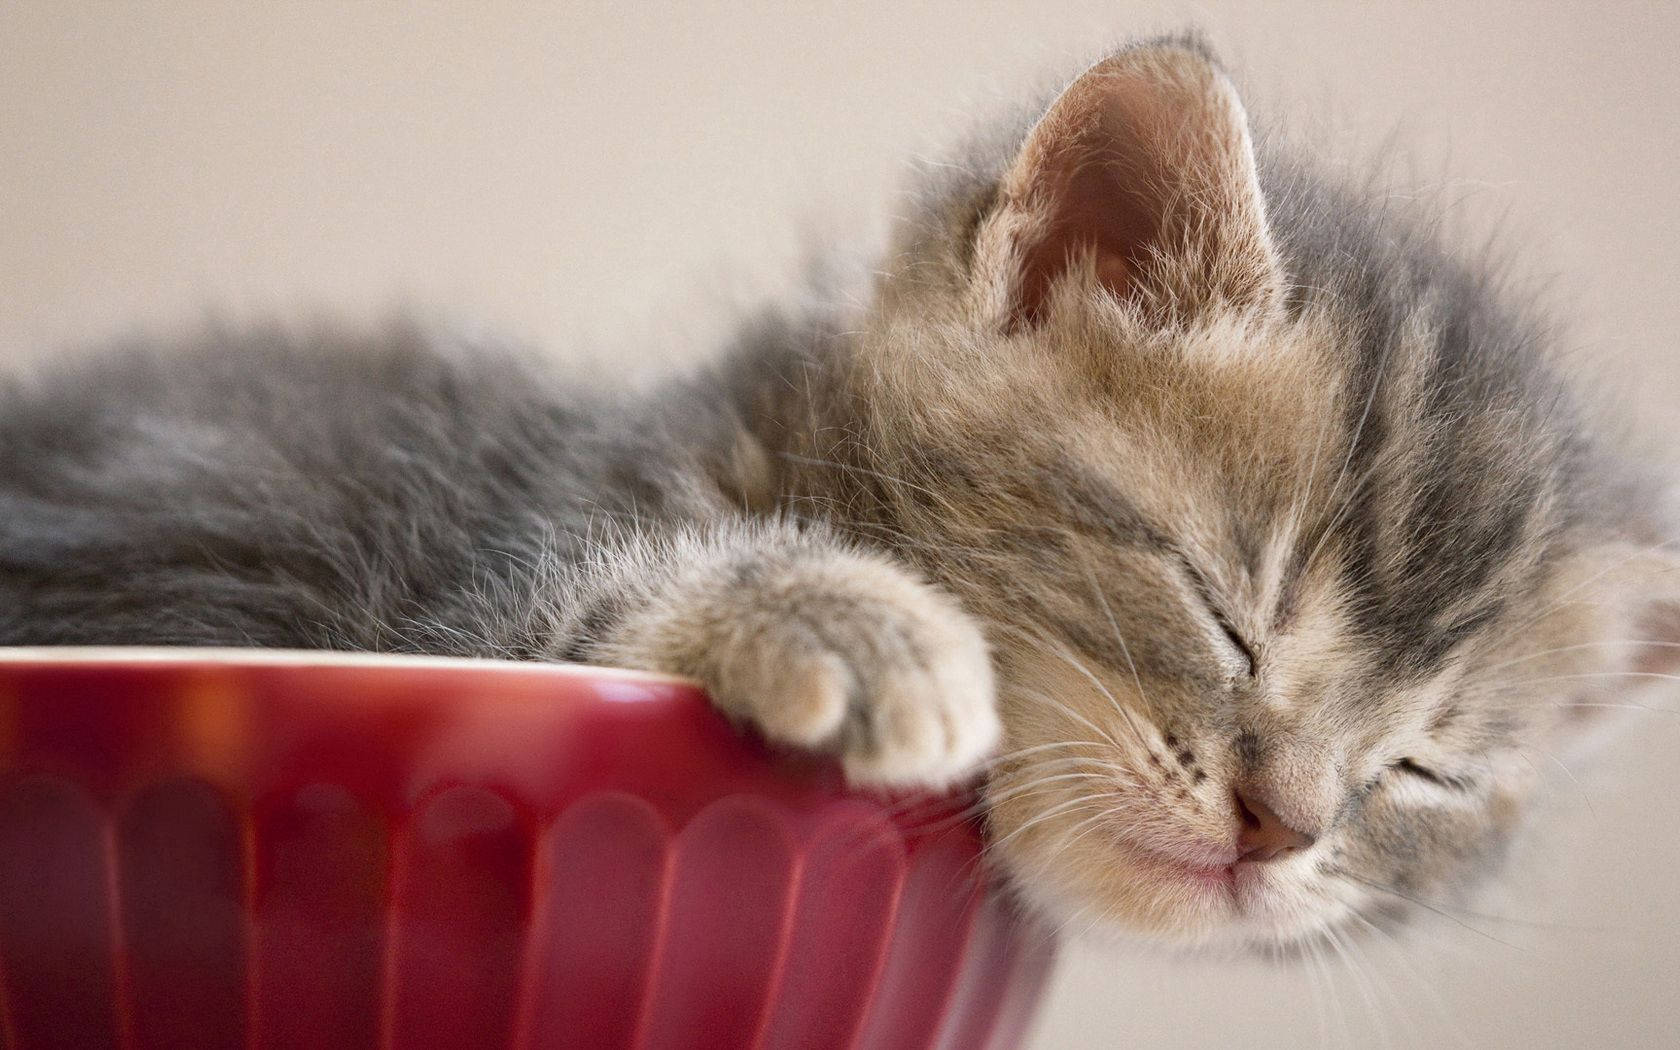 Adorable Kitten Napping In A Cup Wallpaper